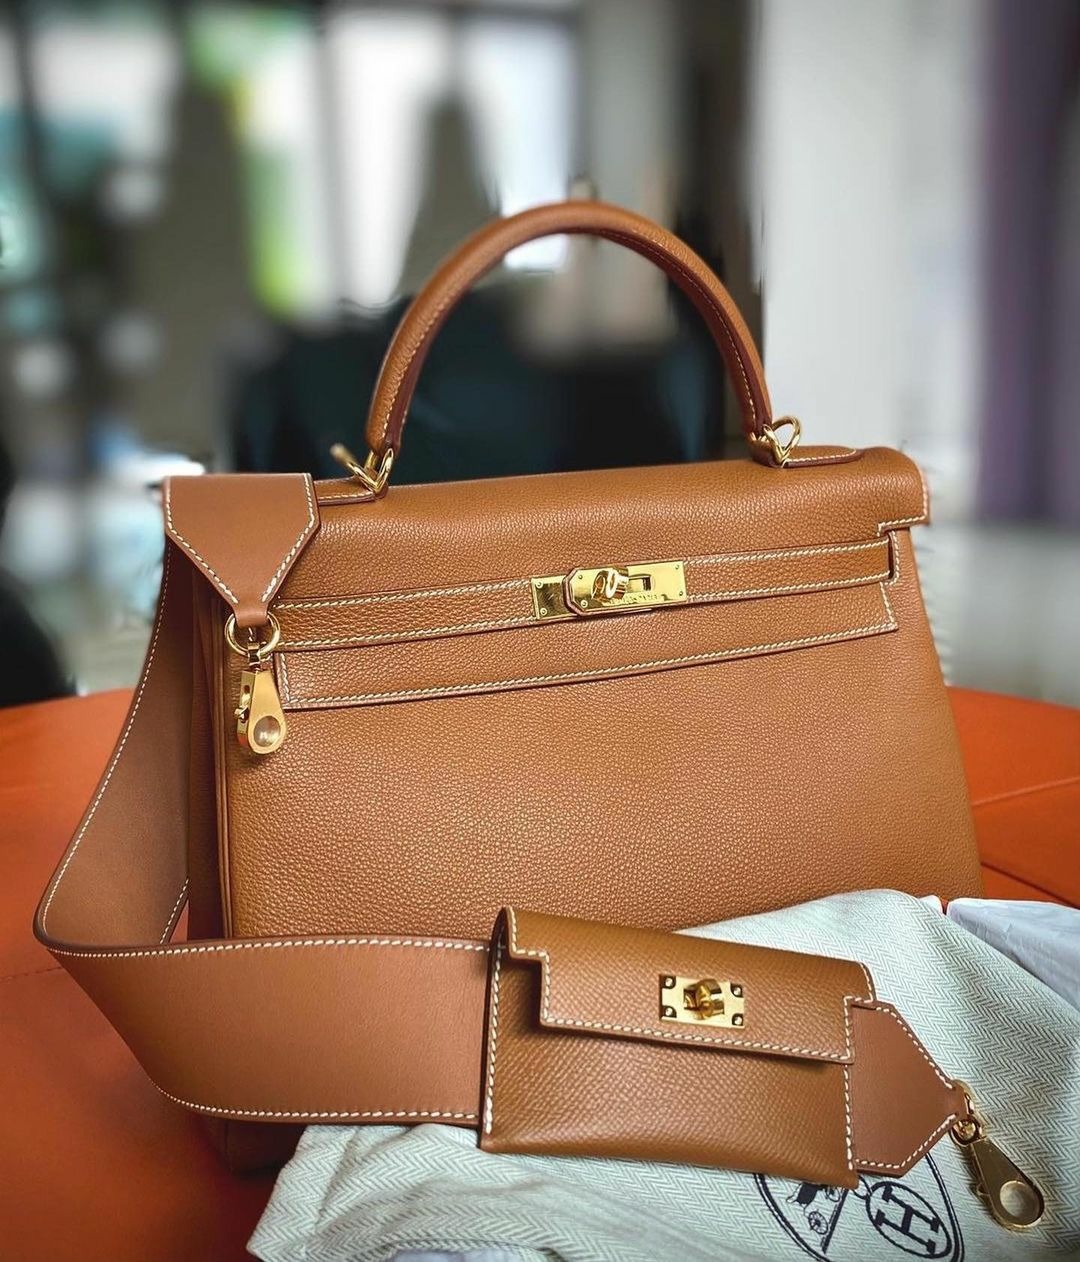 SLFMag — Hermes Kelly bag with matching strap featuring a